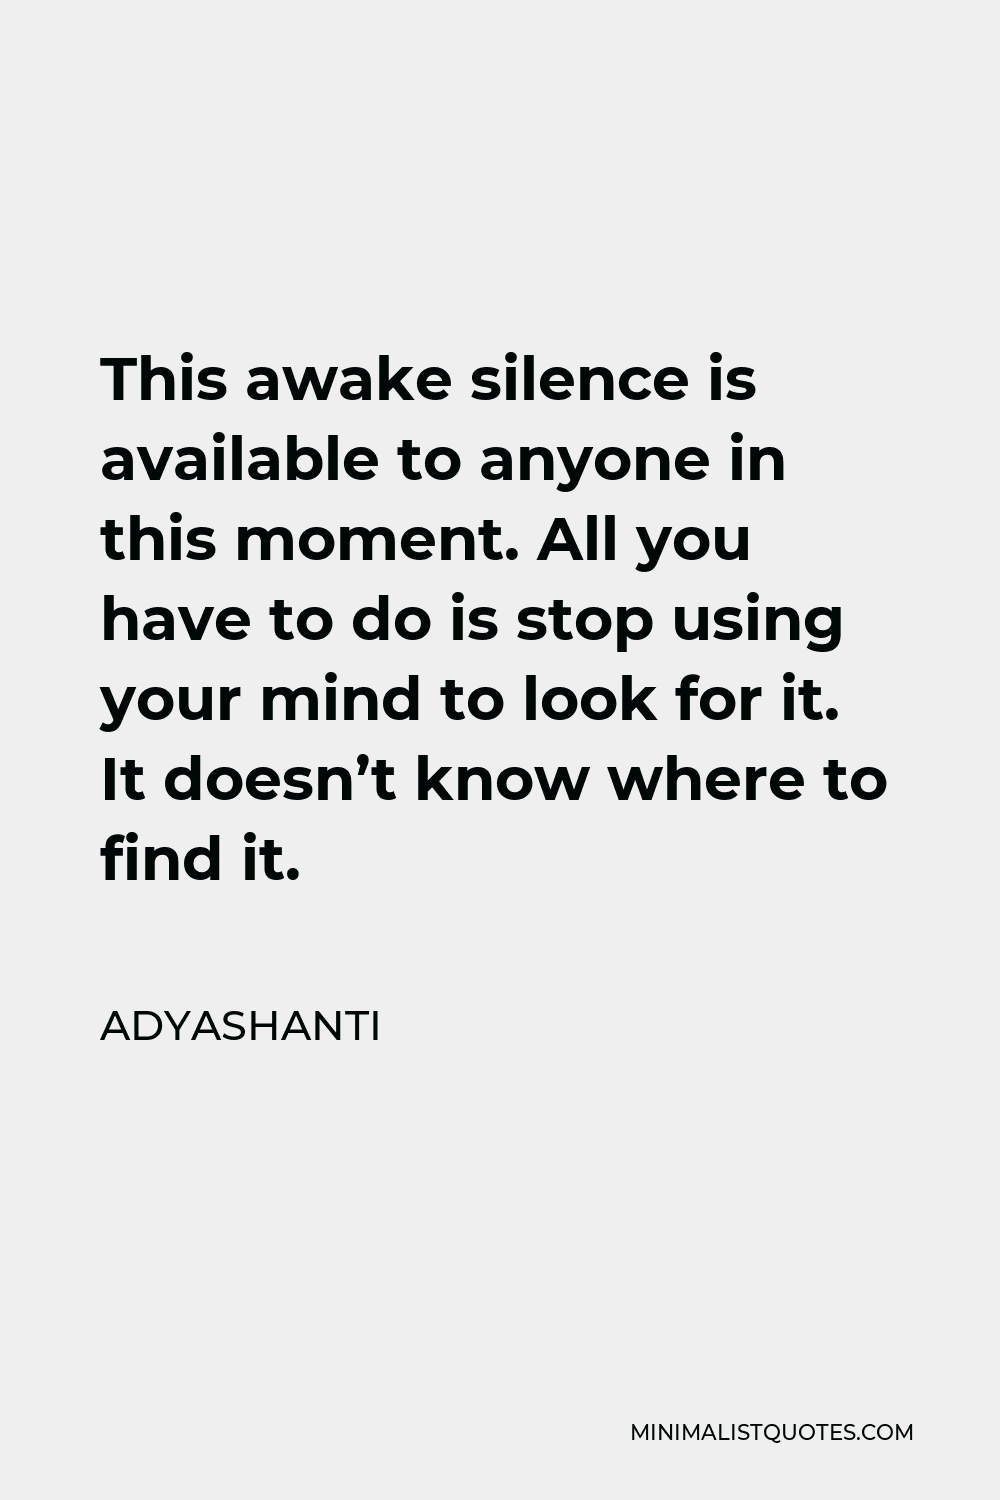 Adyashanti Quote - This awake silence is available to anyone in this moment. All you have to do is stop using your mind to look for it. It doesn’t know where to find it.